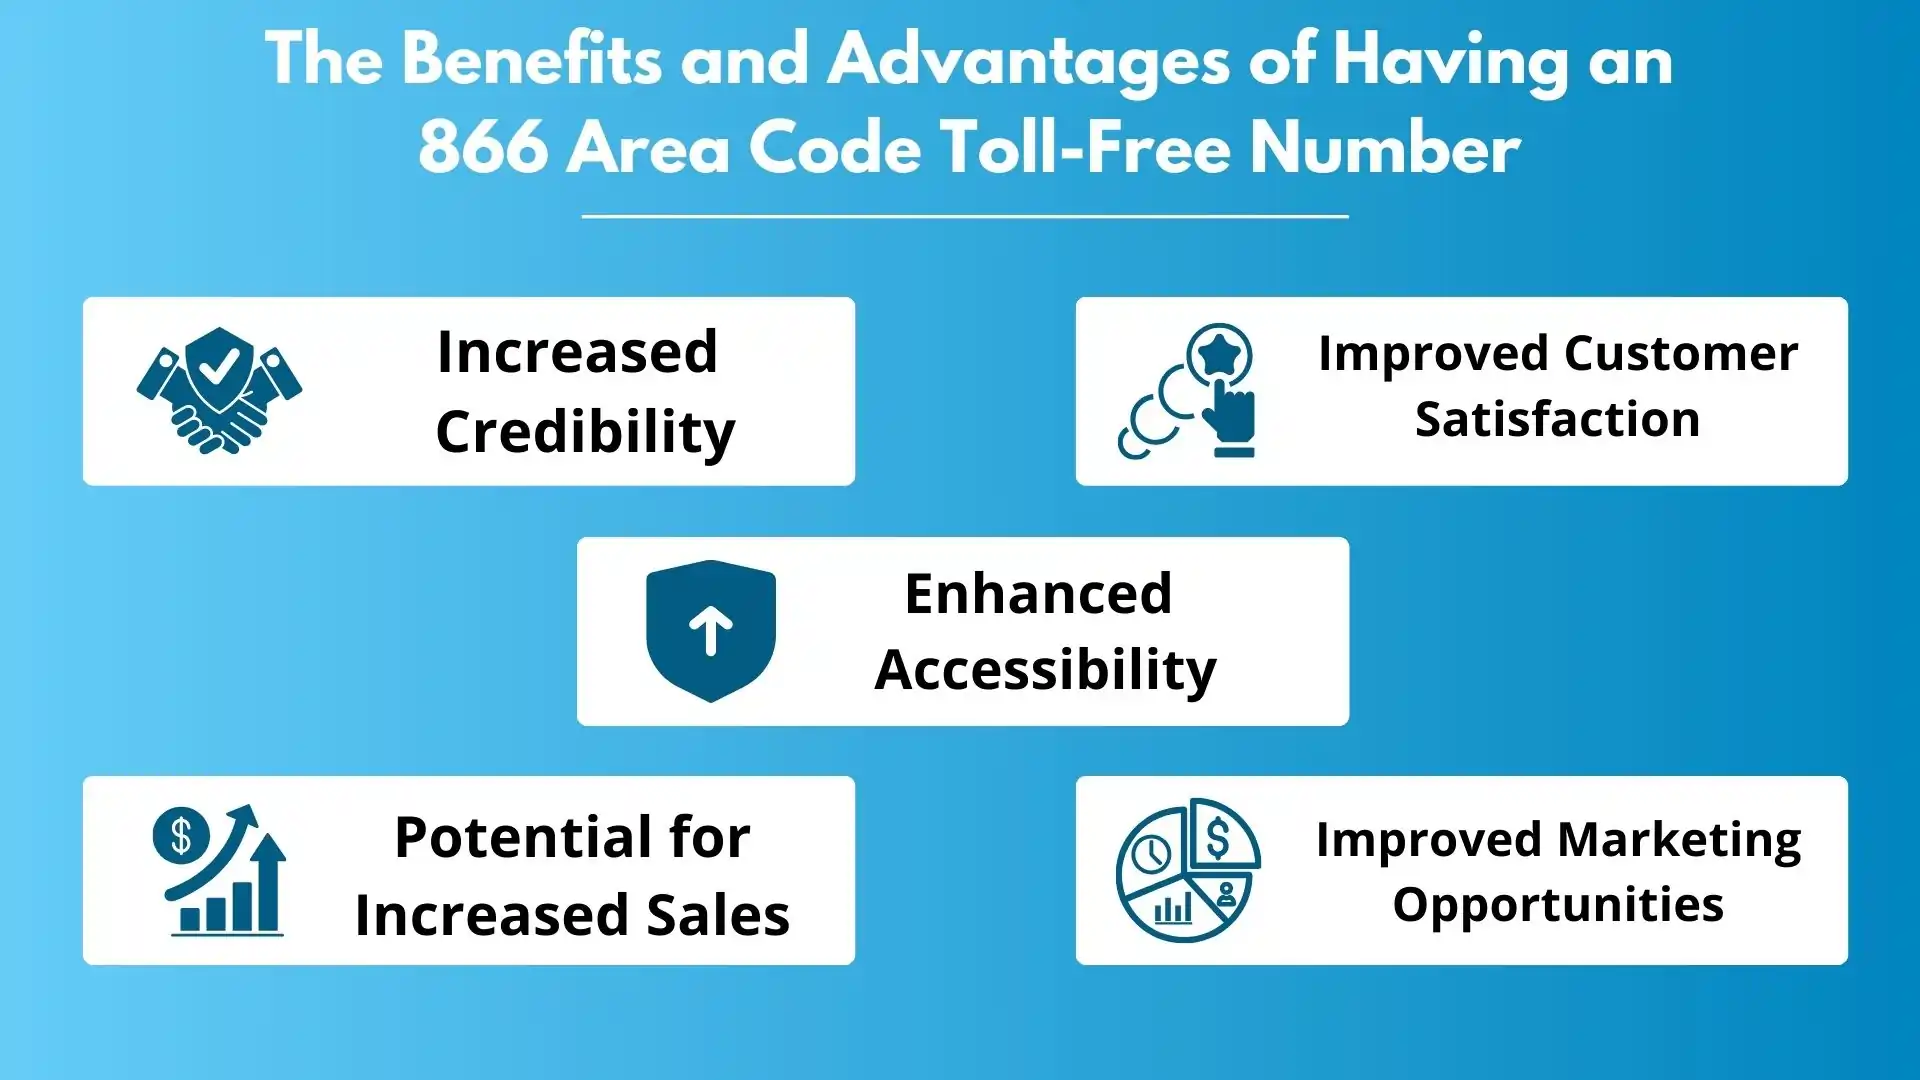 Benefits and Advantages of Having an 866 Area Code